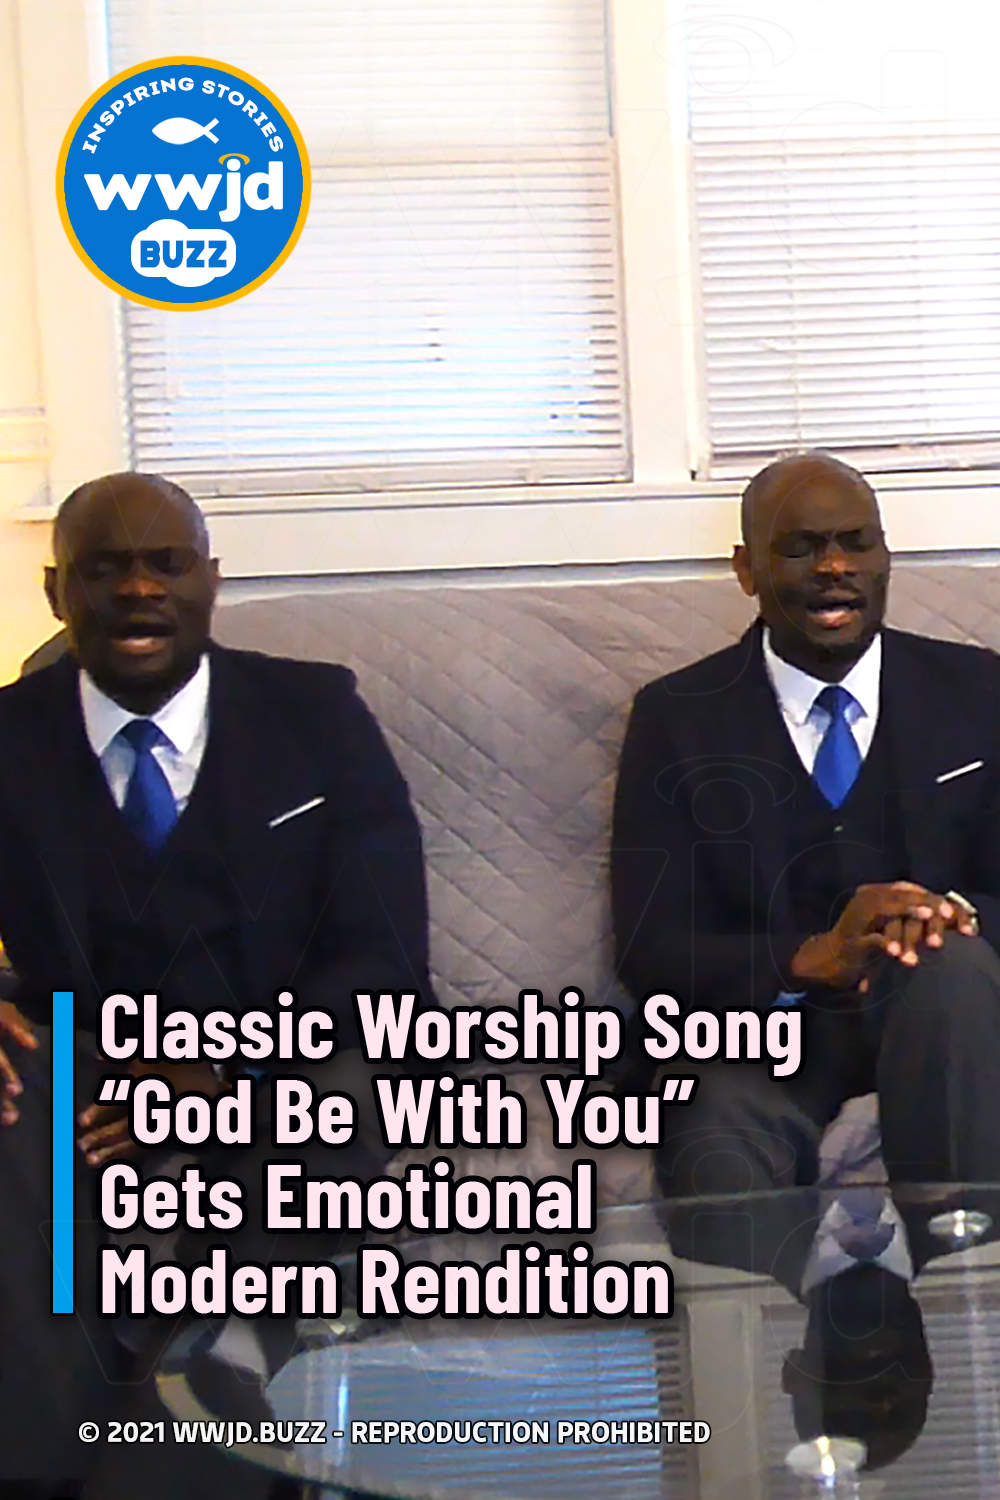 Classic Worship Song “God Be With You” Gets Emotional Modern Rendition